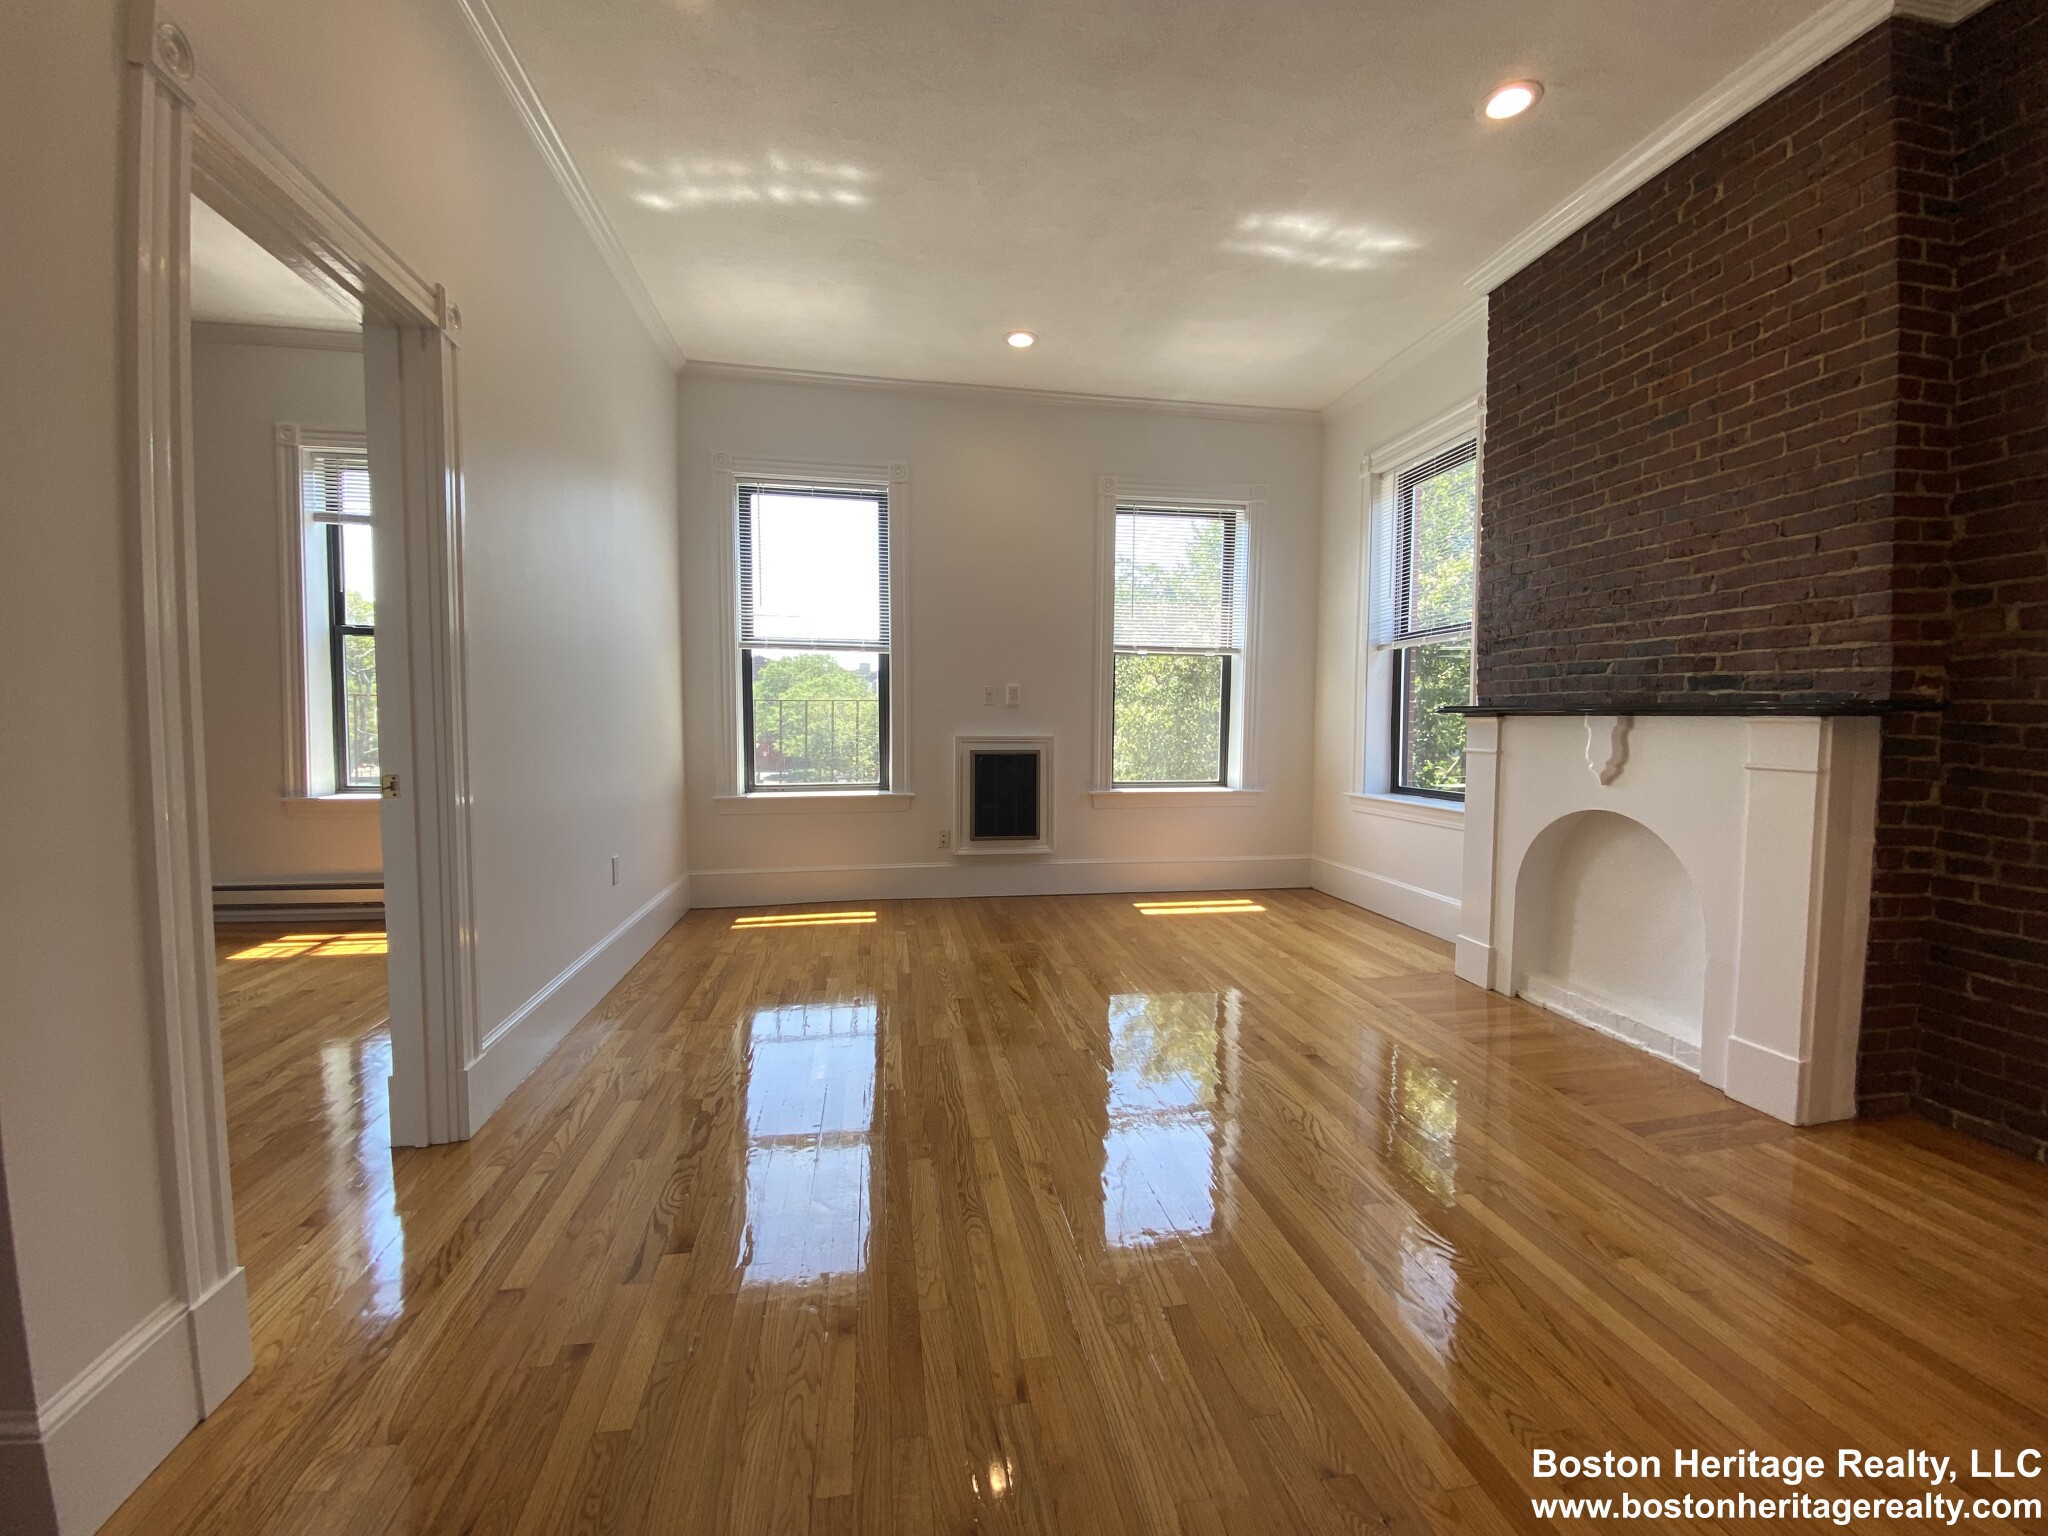 1 Bed, 1 Bath apartment in Boston, South End for $2,500